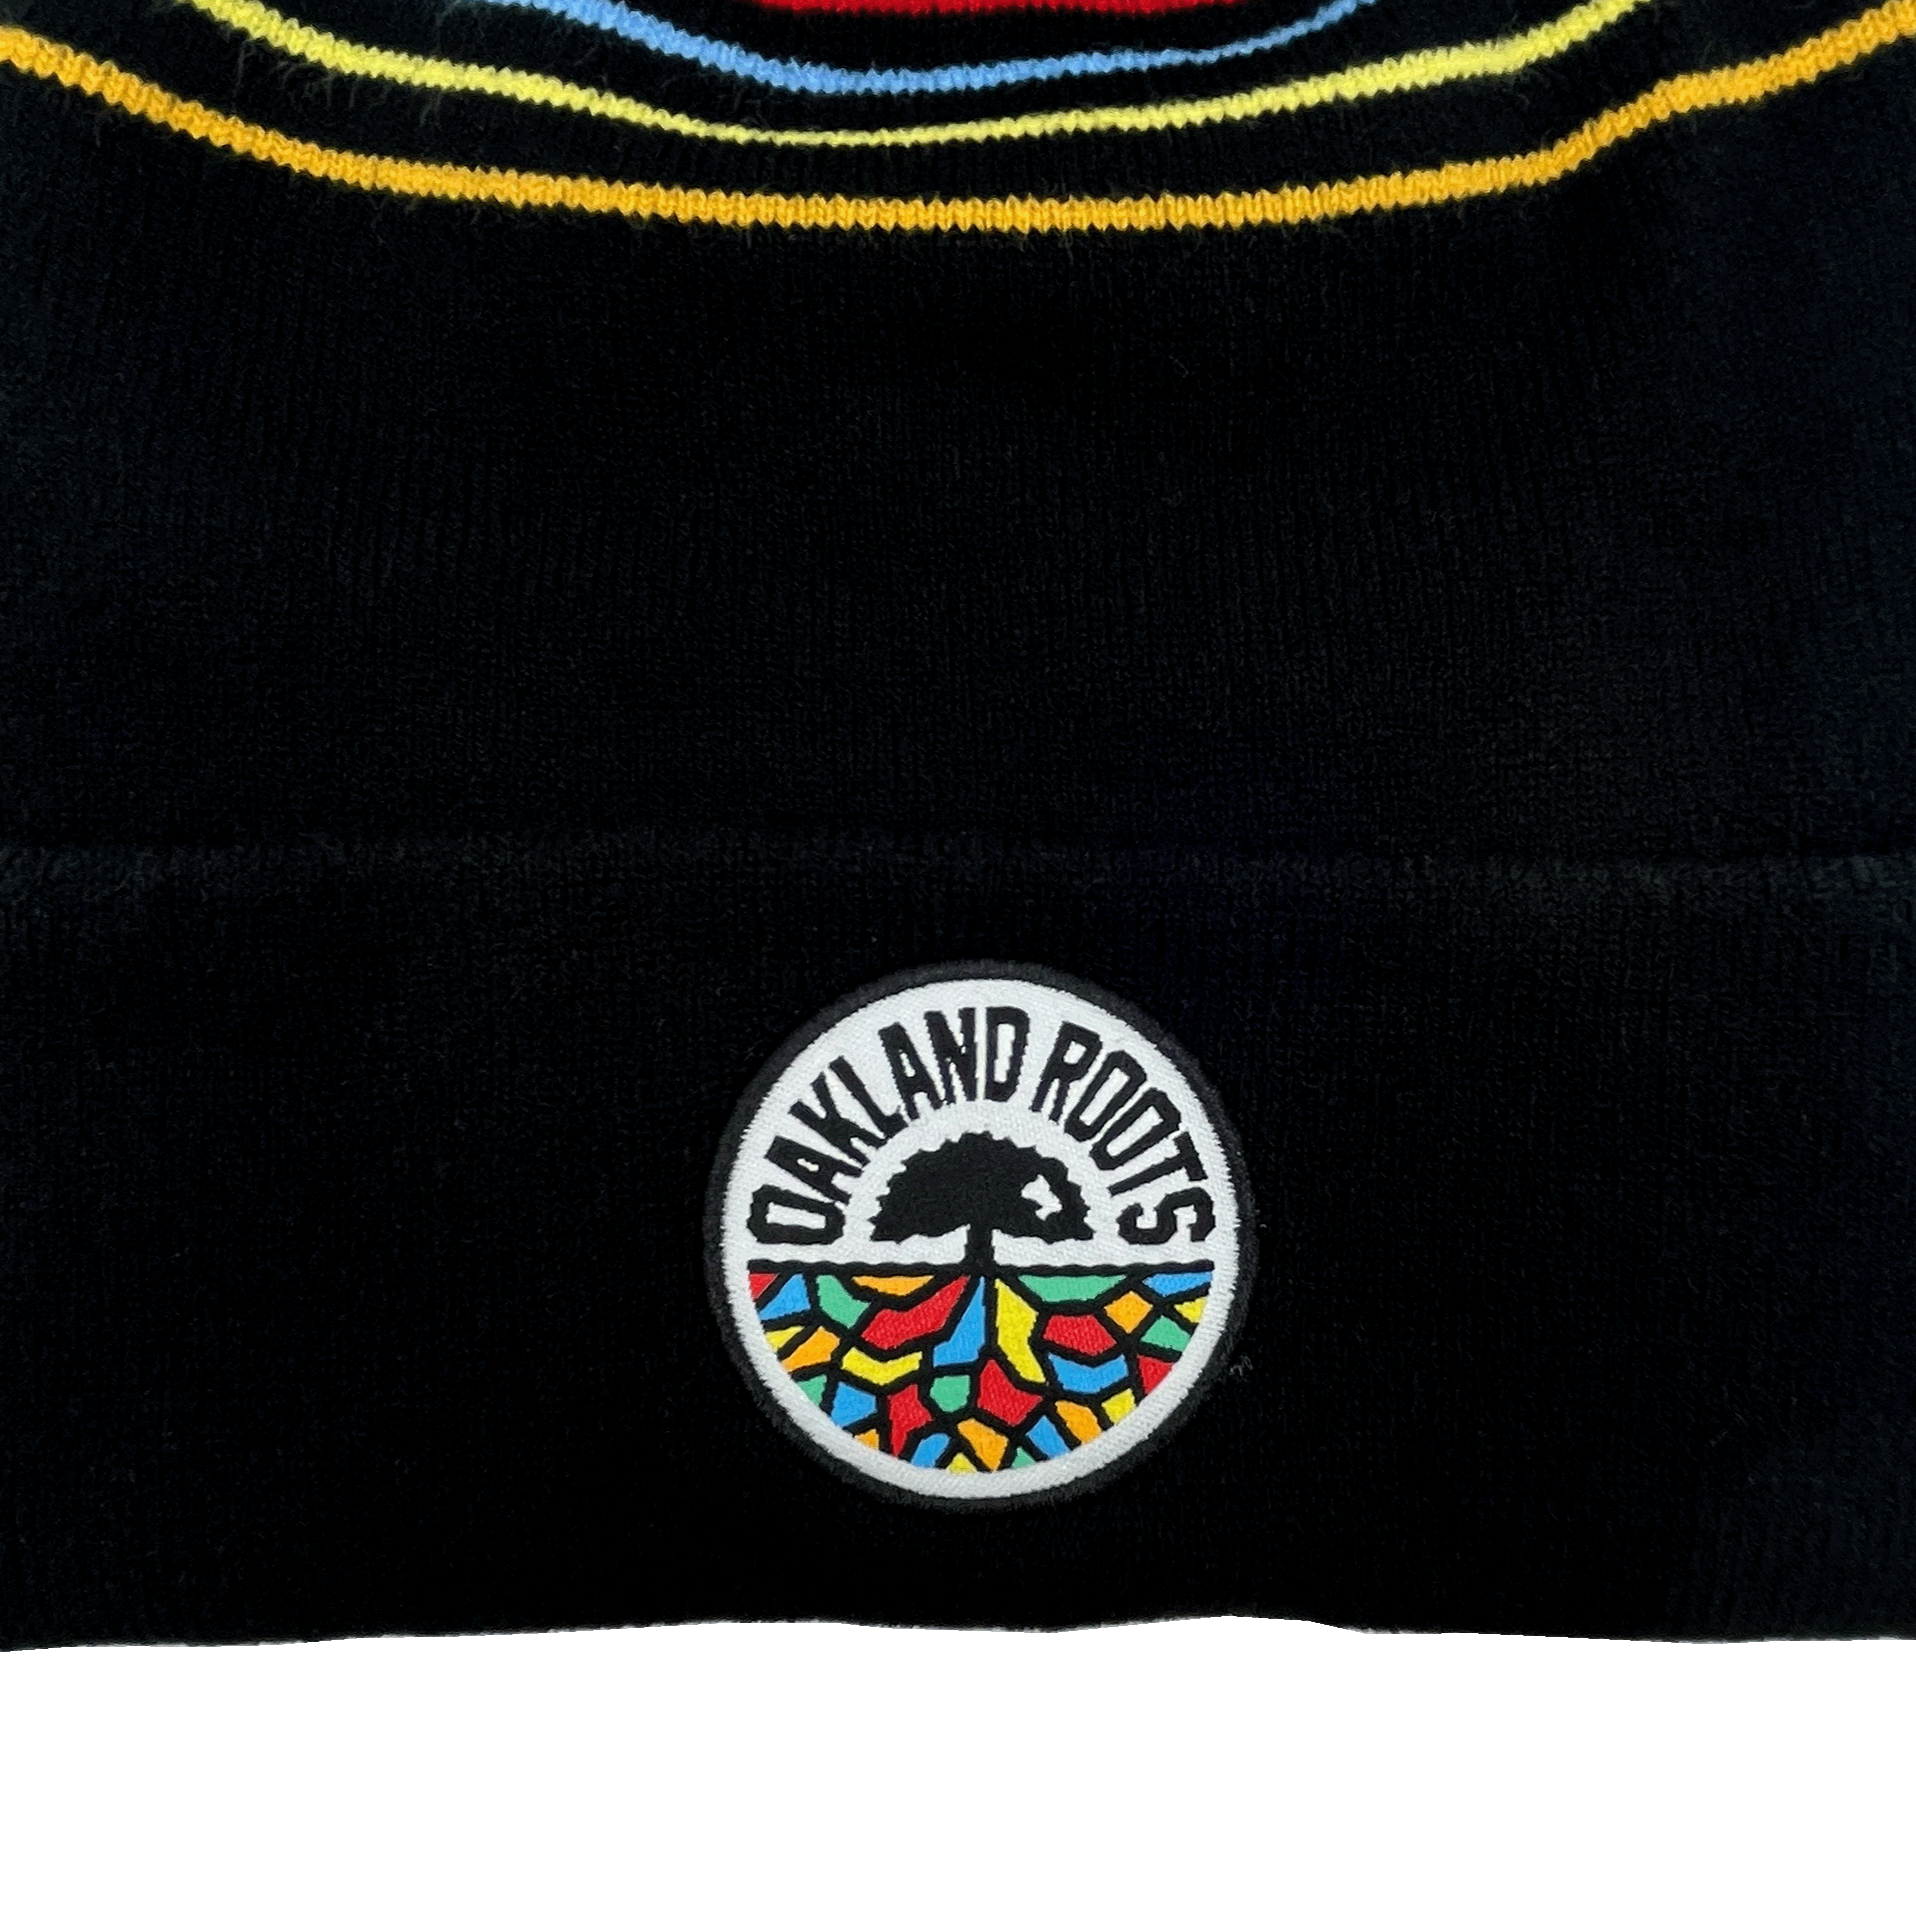 Close-up of Oakland Roots SC circle logo on the rolled cuff and colored stripes on the crown of a black pom hat.